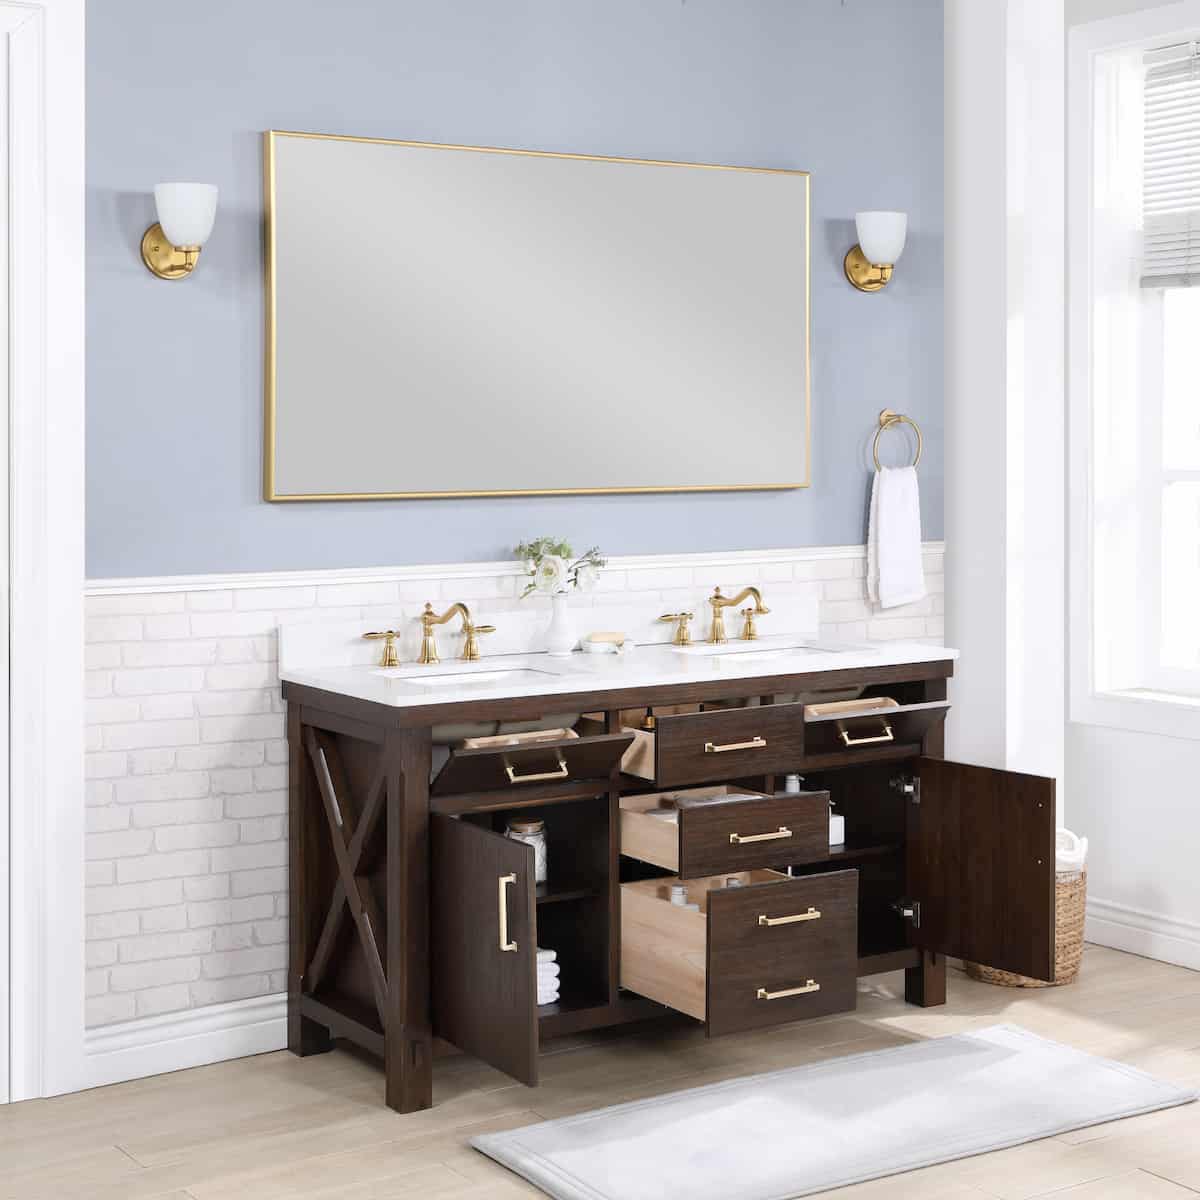 Vinnova Viella 60 Inch Double Sink Bath Vanity in Deep Walnut with White Composite Countertop With Mirror Inside 701860-DW-WS